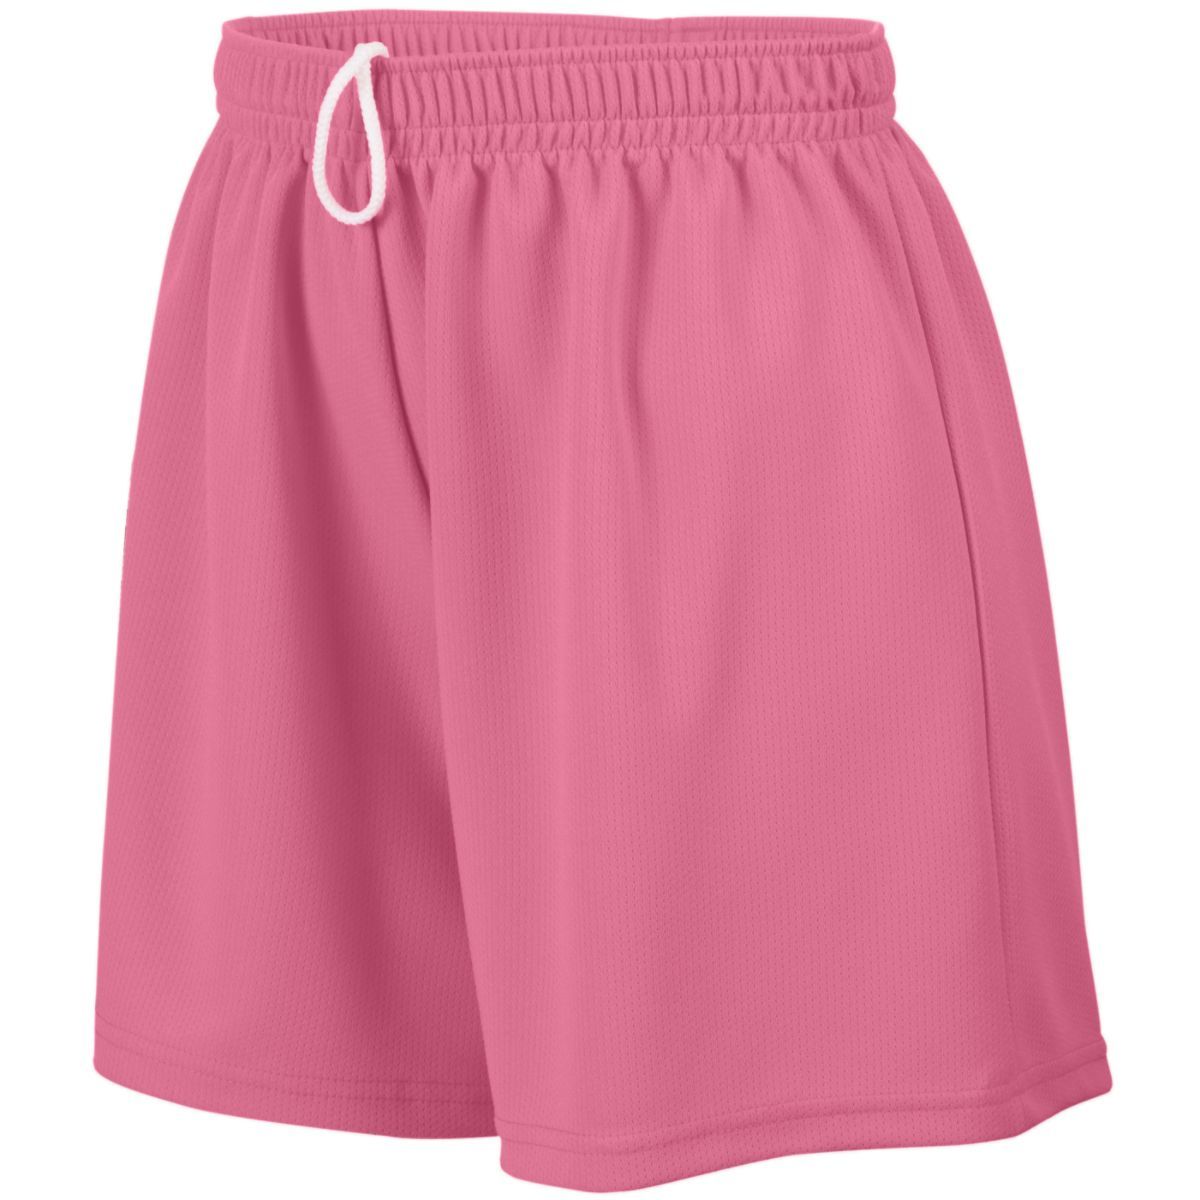 Augusta Sportswear Girls Wicking Mesh Shorts in Pink  -Part of the Girls, Augusta-Products, Lacrosse, Girls-Shorts, All-Sports, All-Sports-1 product lines at KanaleyCreations.com